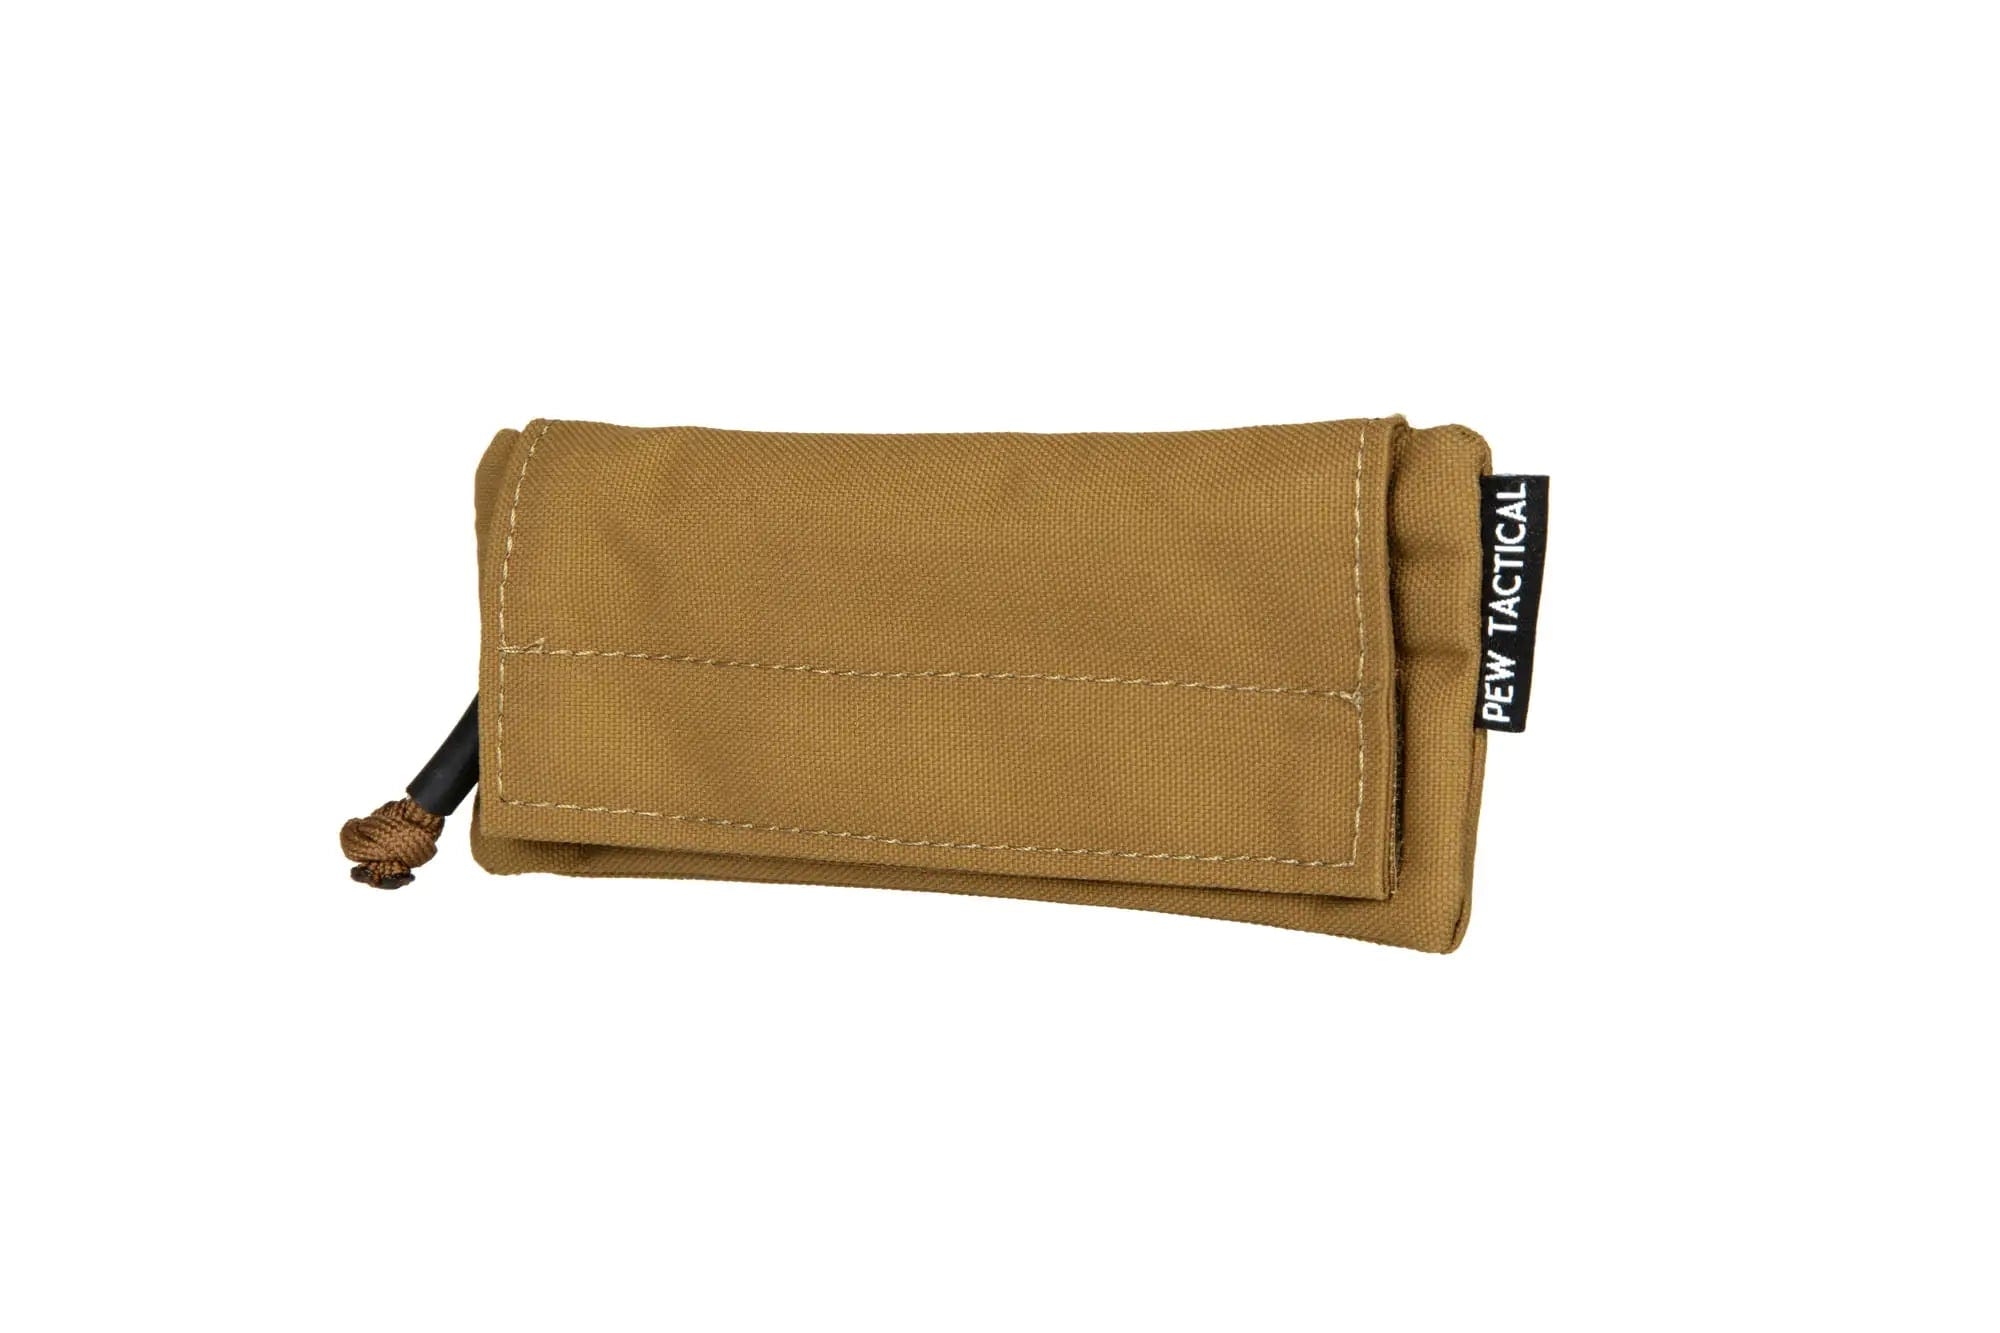 AK Stock Pouch - Coyote Brown